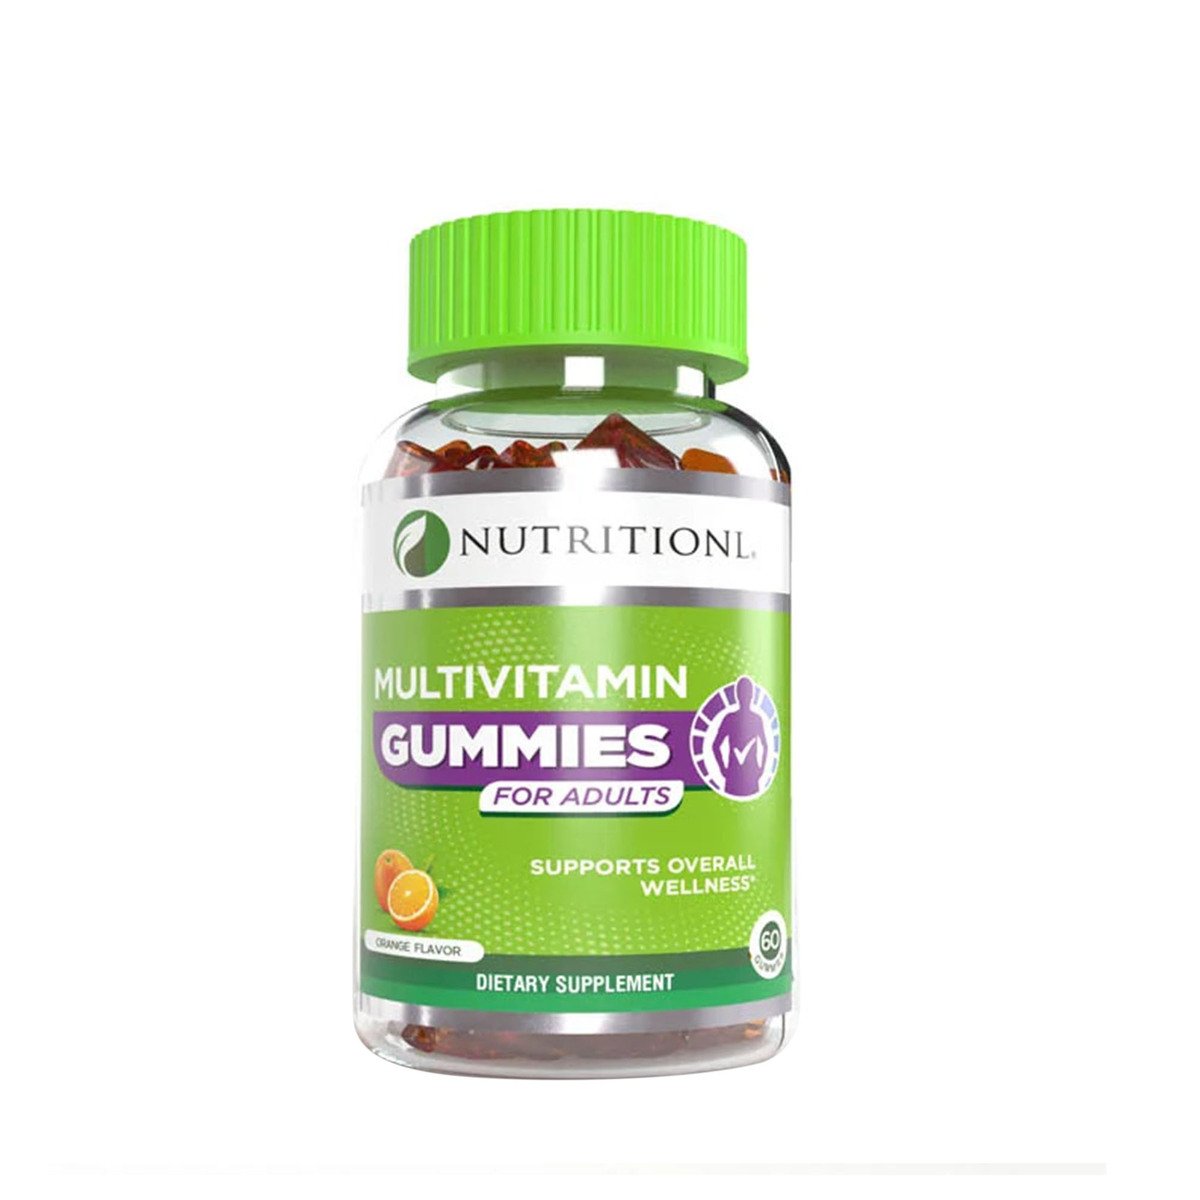 Nutritionl Multivitamins Gummies For Adults With Orange Flavor 60 pcs